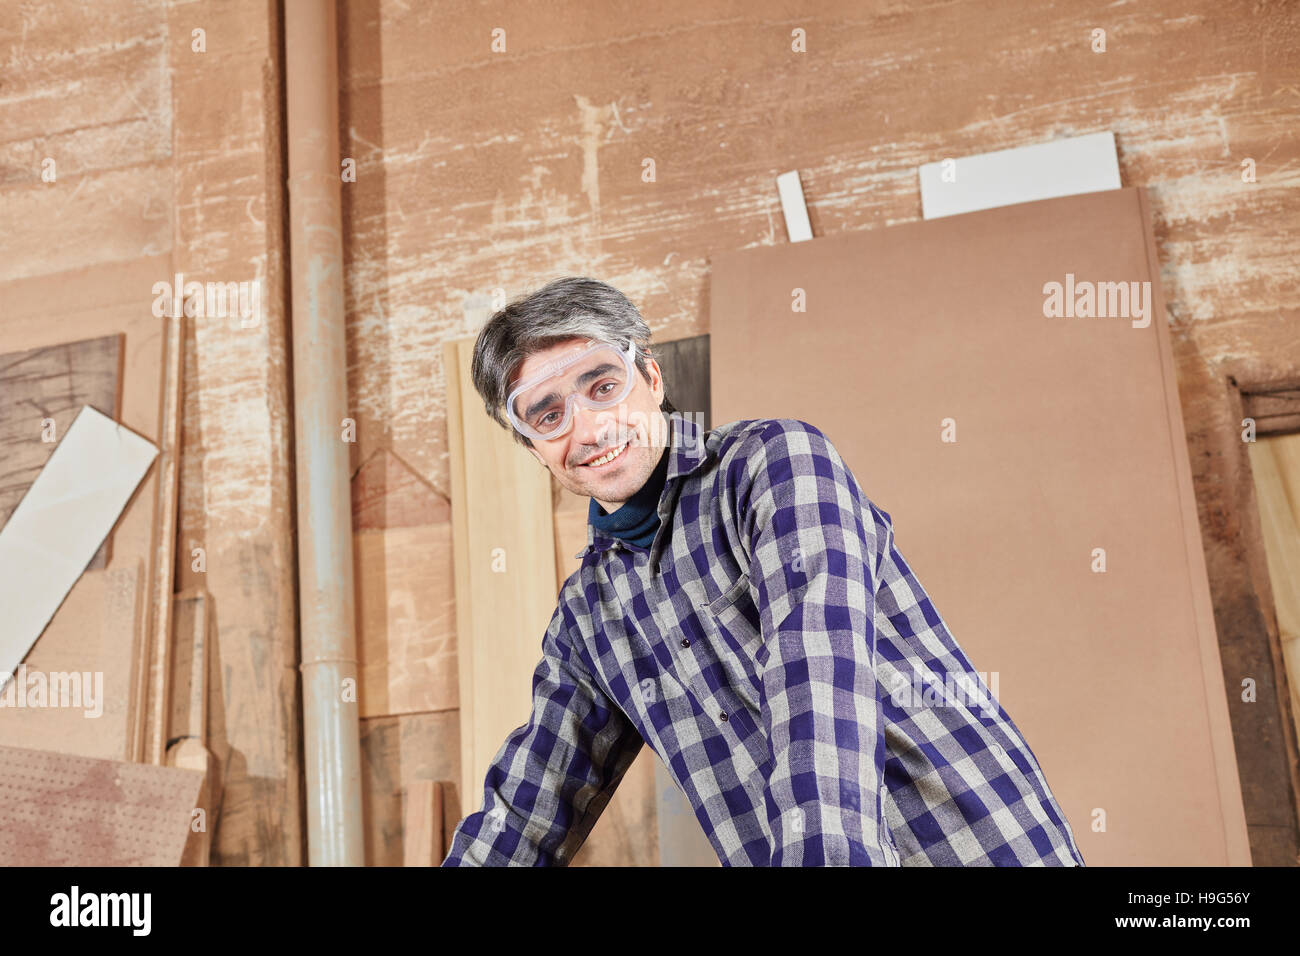 Blue collar worker at workshop working with wood Stock Photo